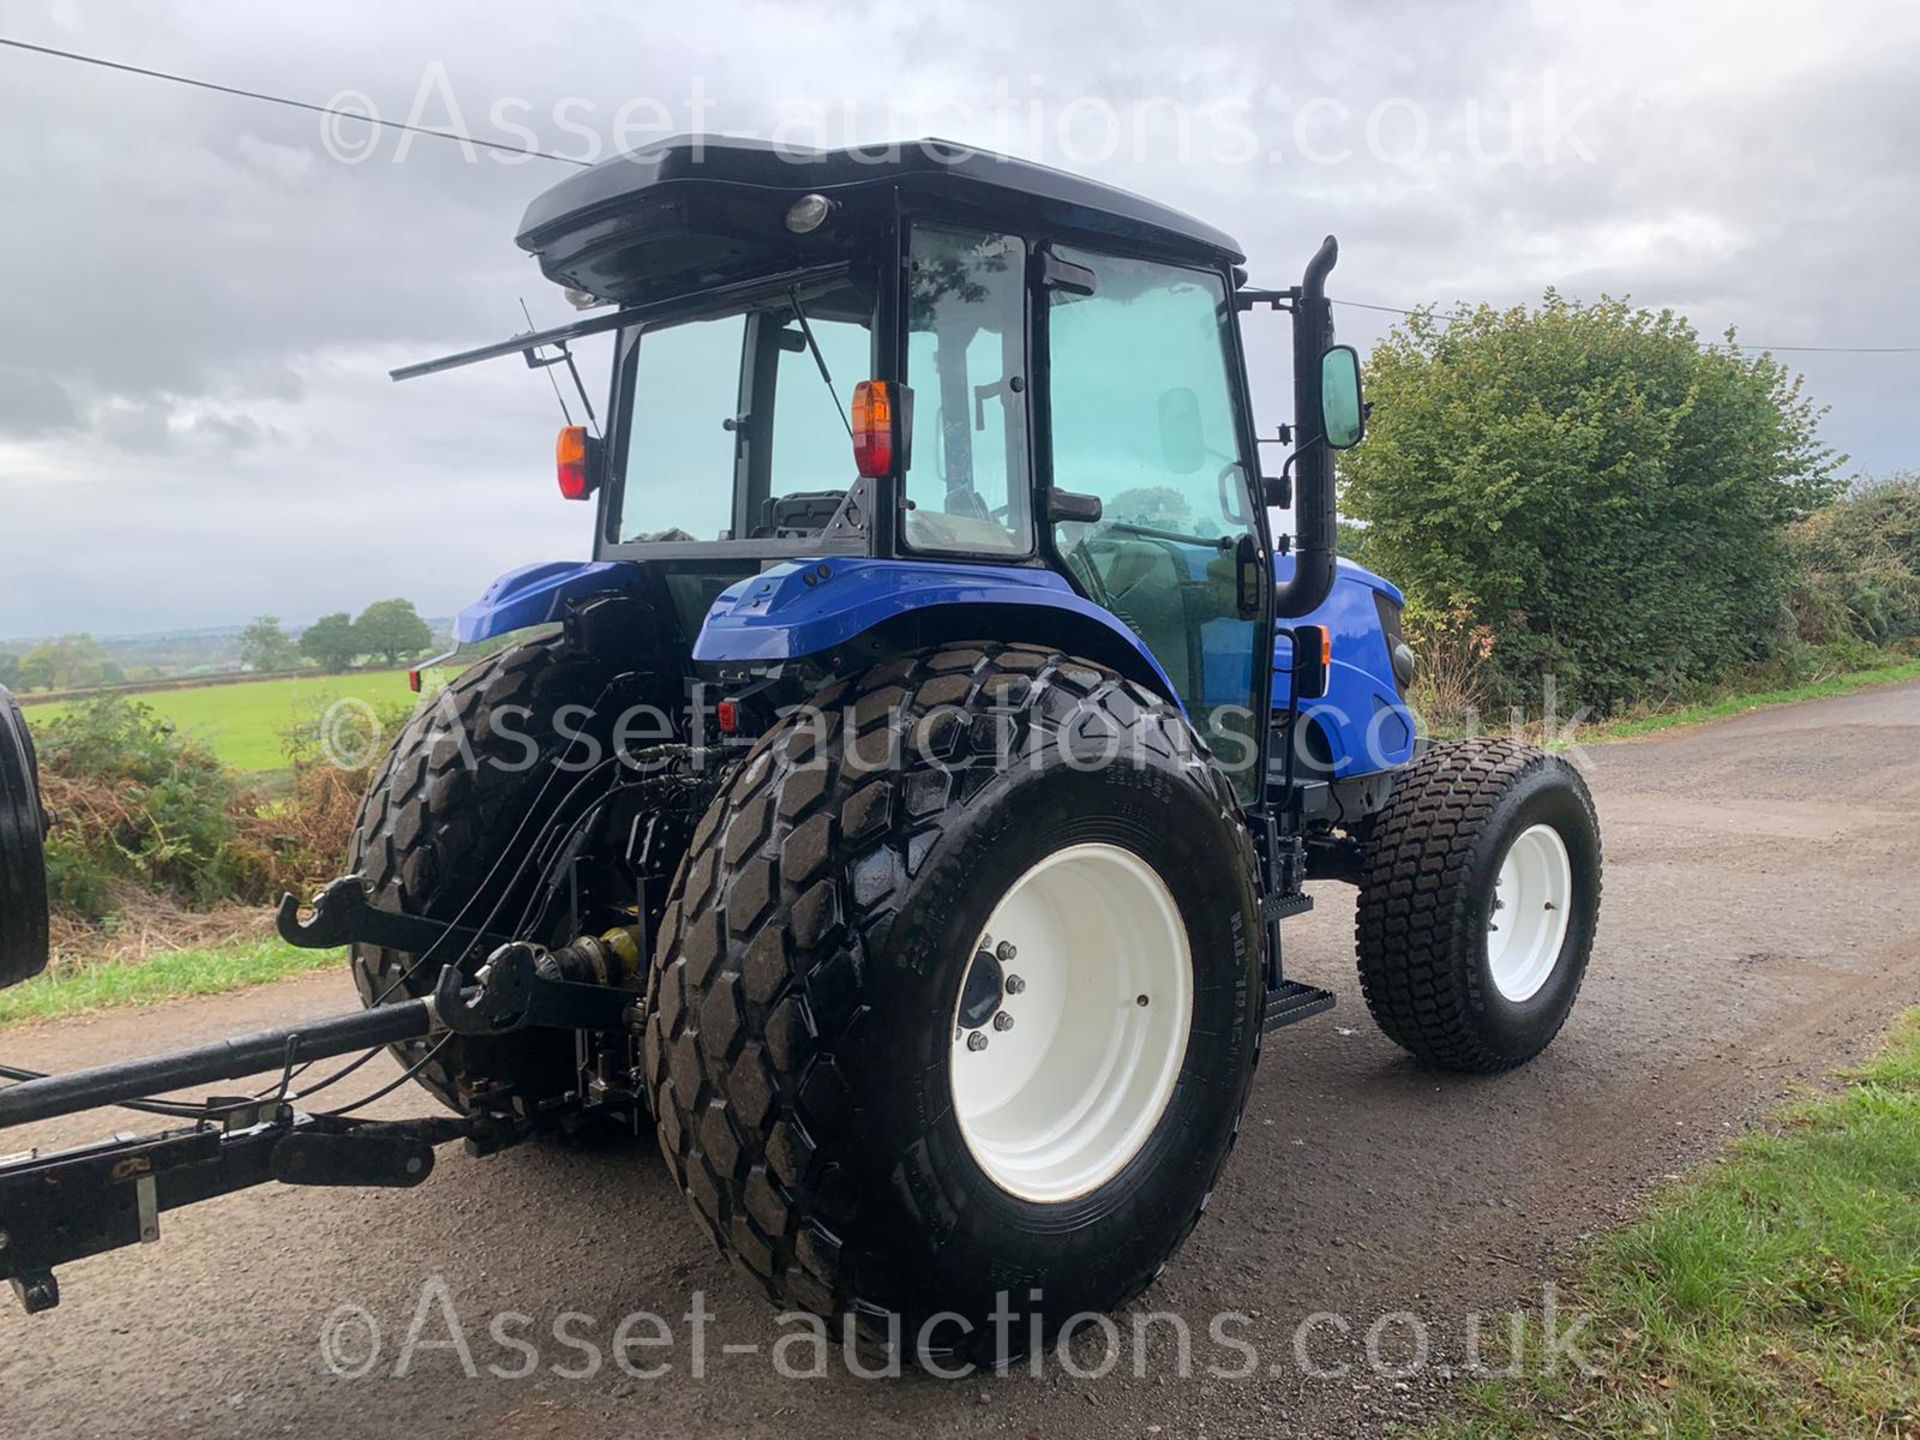 2014 ISEKI TJA8080 86hp 4WD TRACTOR, RUNS DRIVES AND WORKS, SHOWING A LOW AN GENUINE 960 HOURS - Image 4 of 10